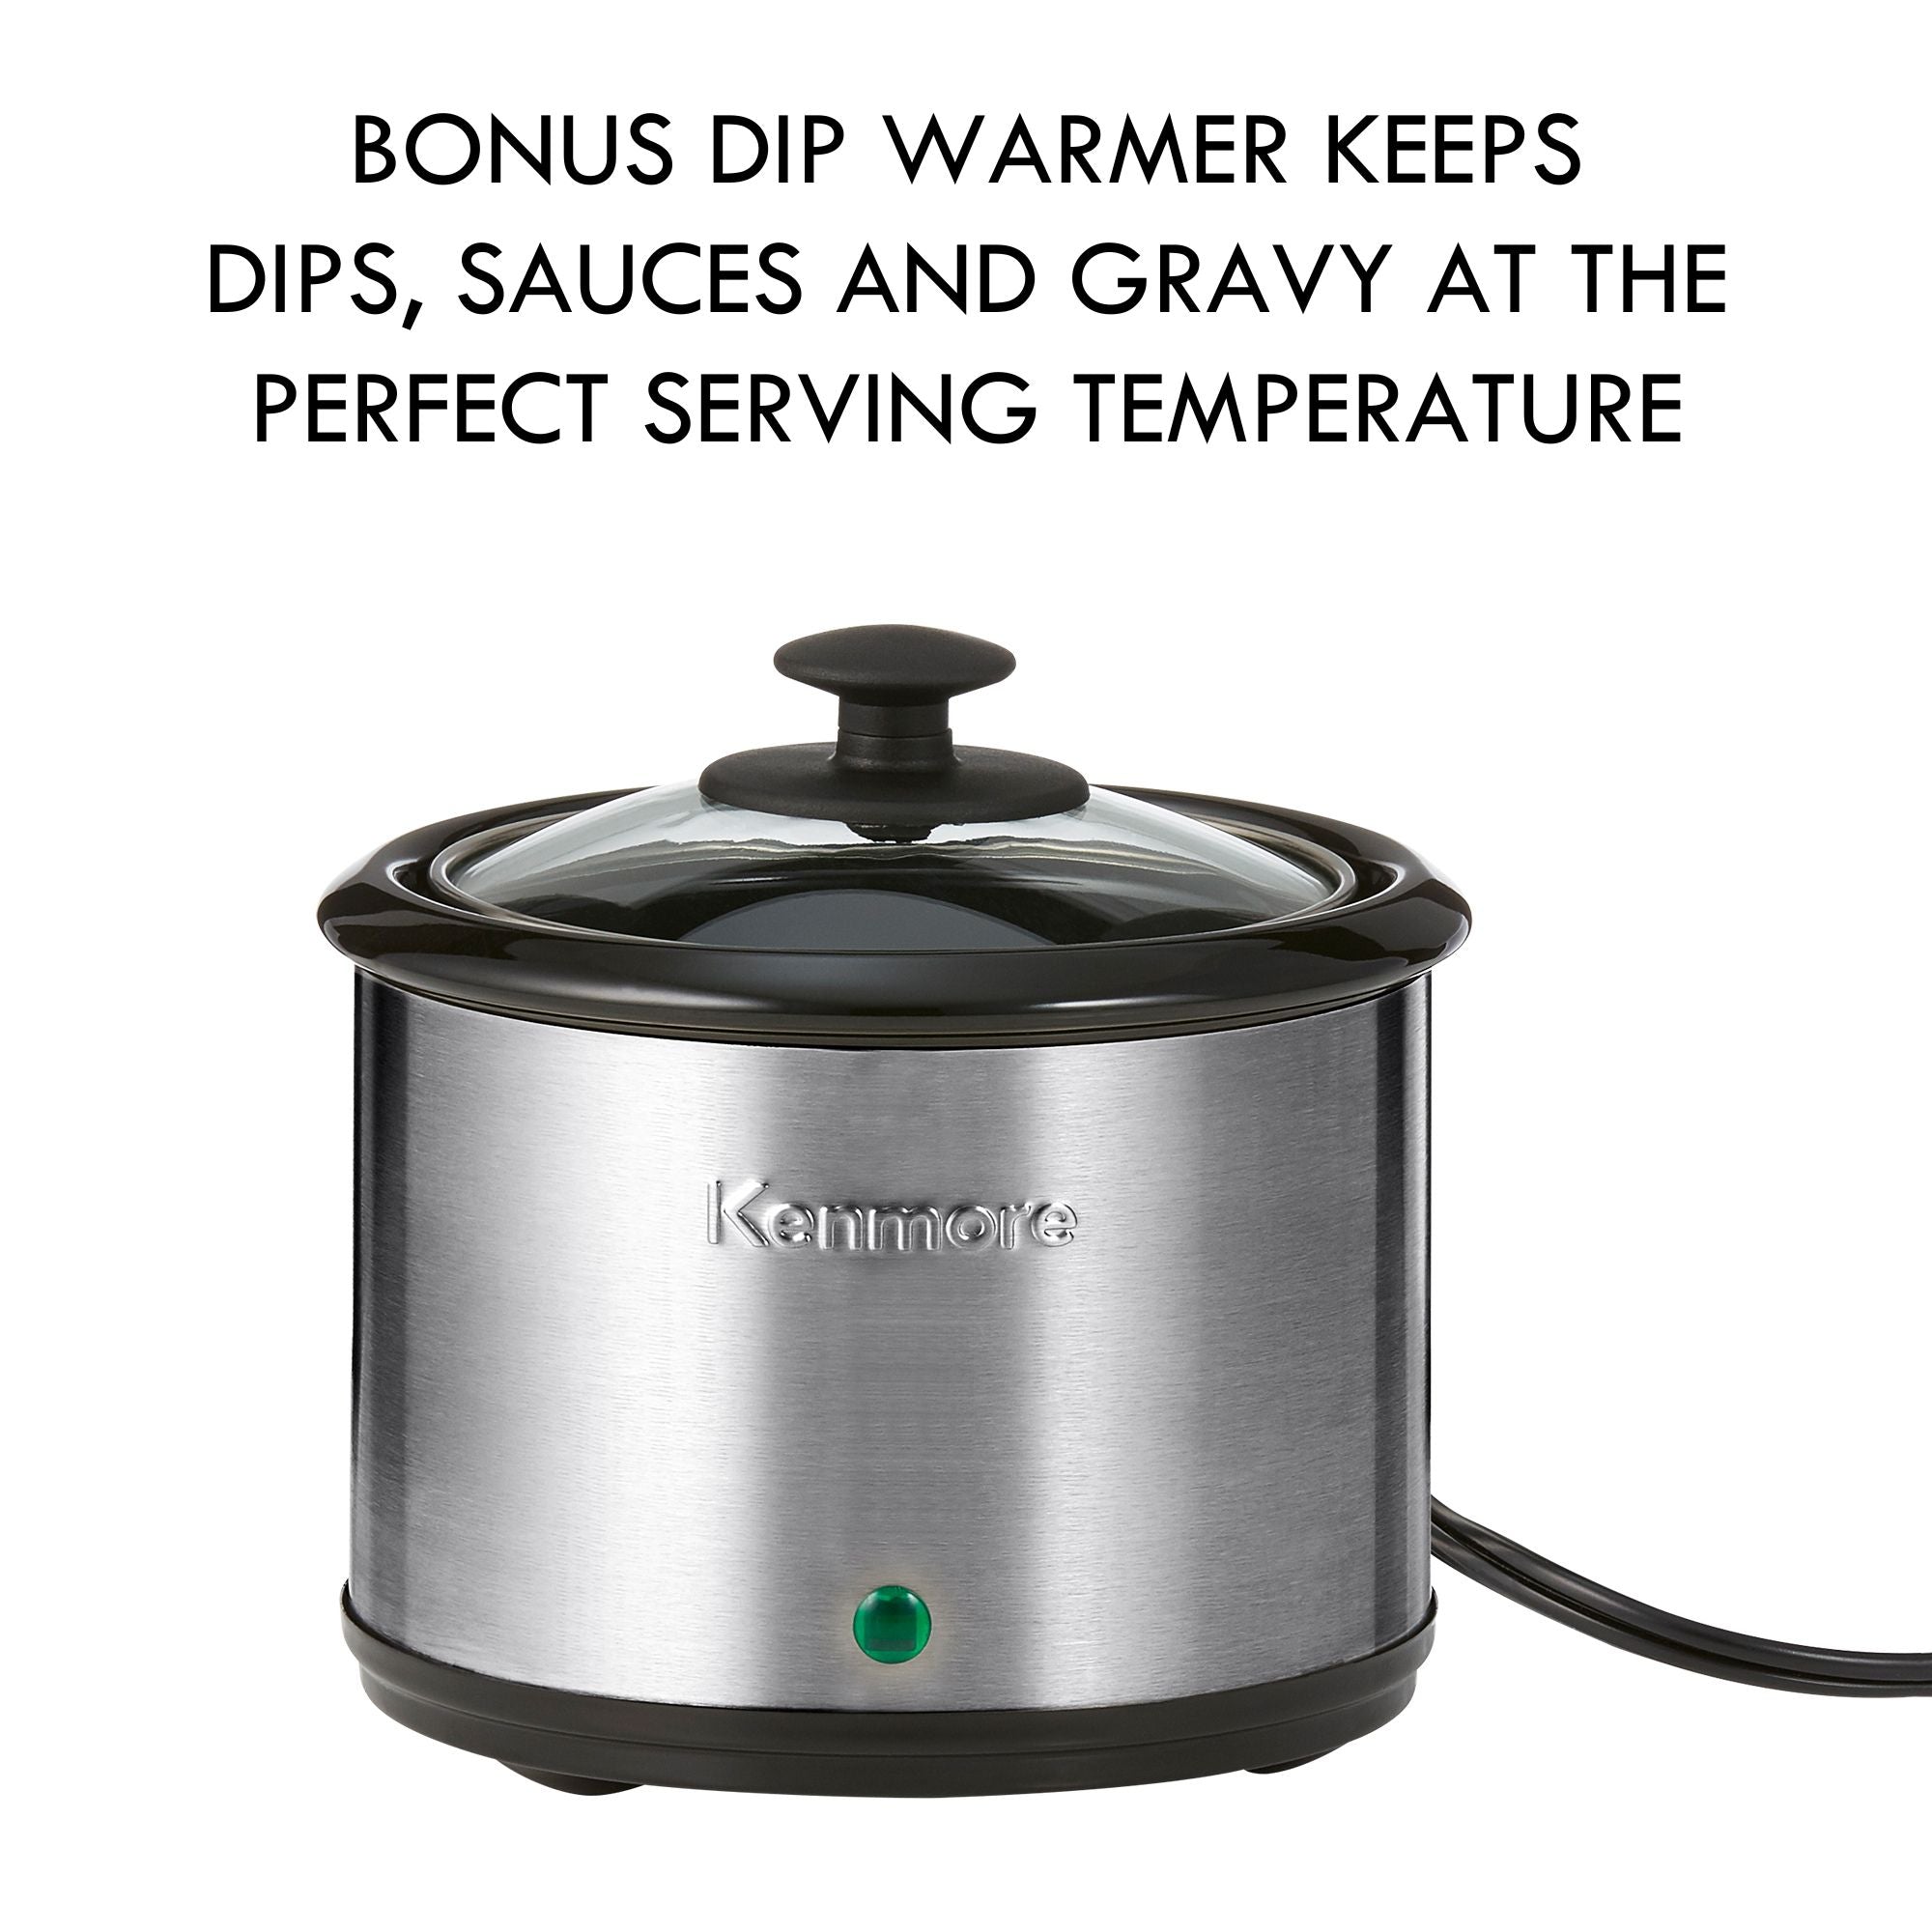 Kenmore sauce warmer on a white background with text above reading, "Bonus dip warmer keeps dips, sauces, and gravy at the perfect serving temperature"